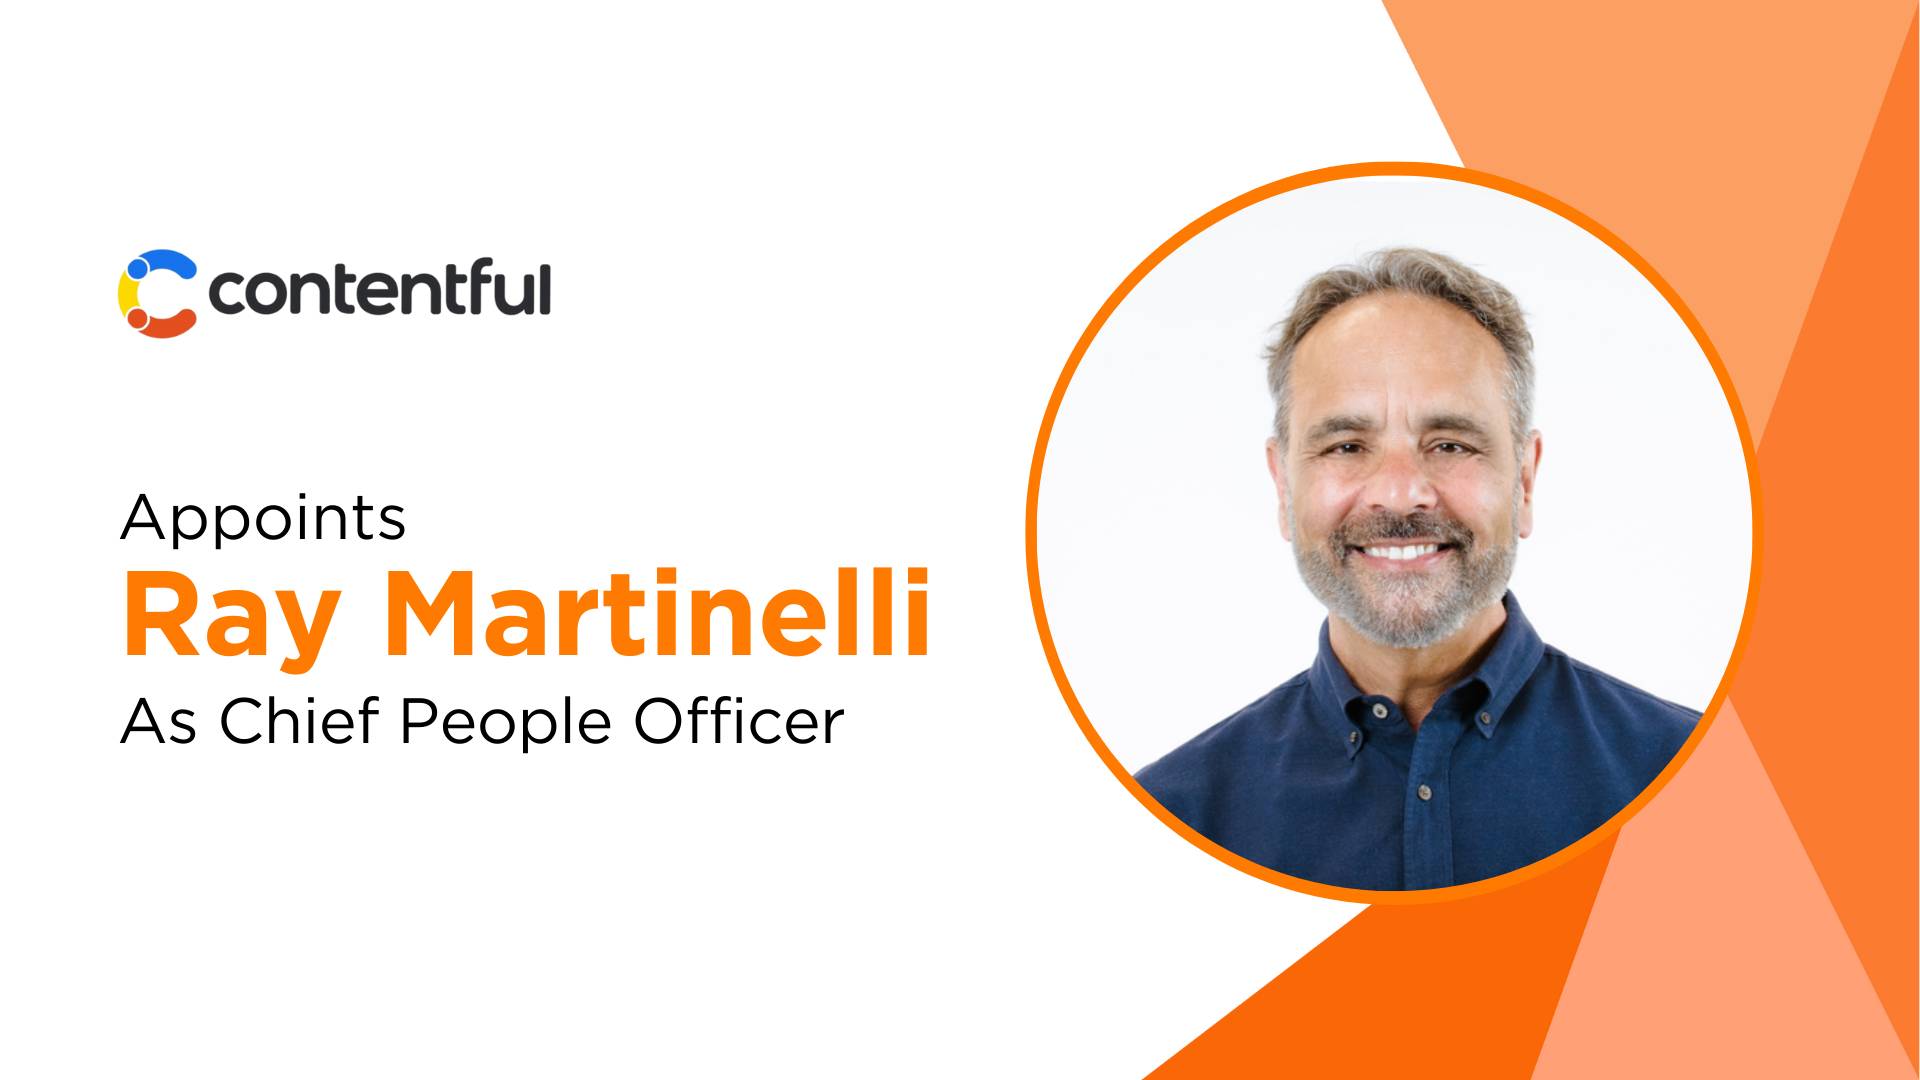 Contentful Appoints Ray Martinelli as Chief People Officer